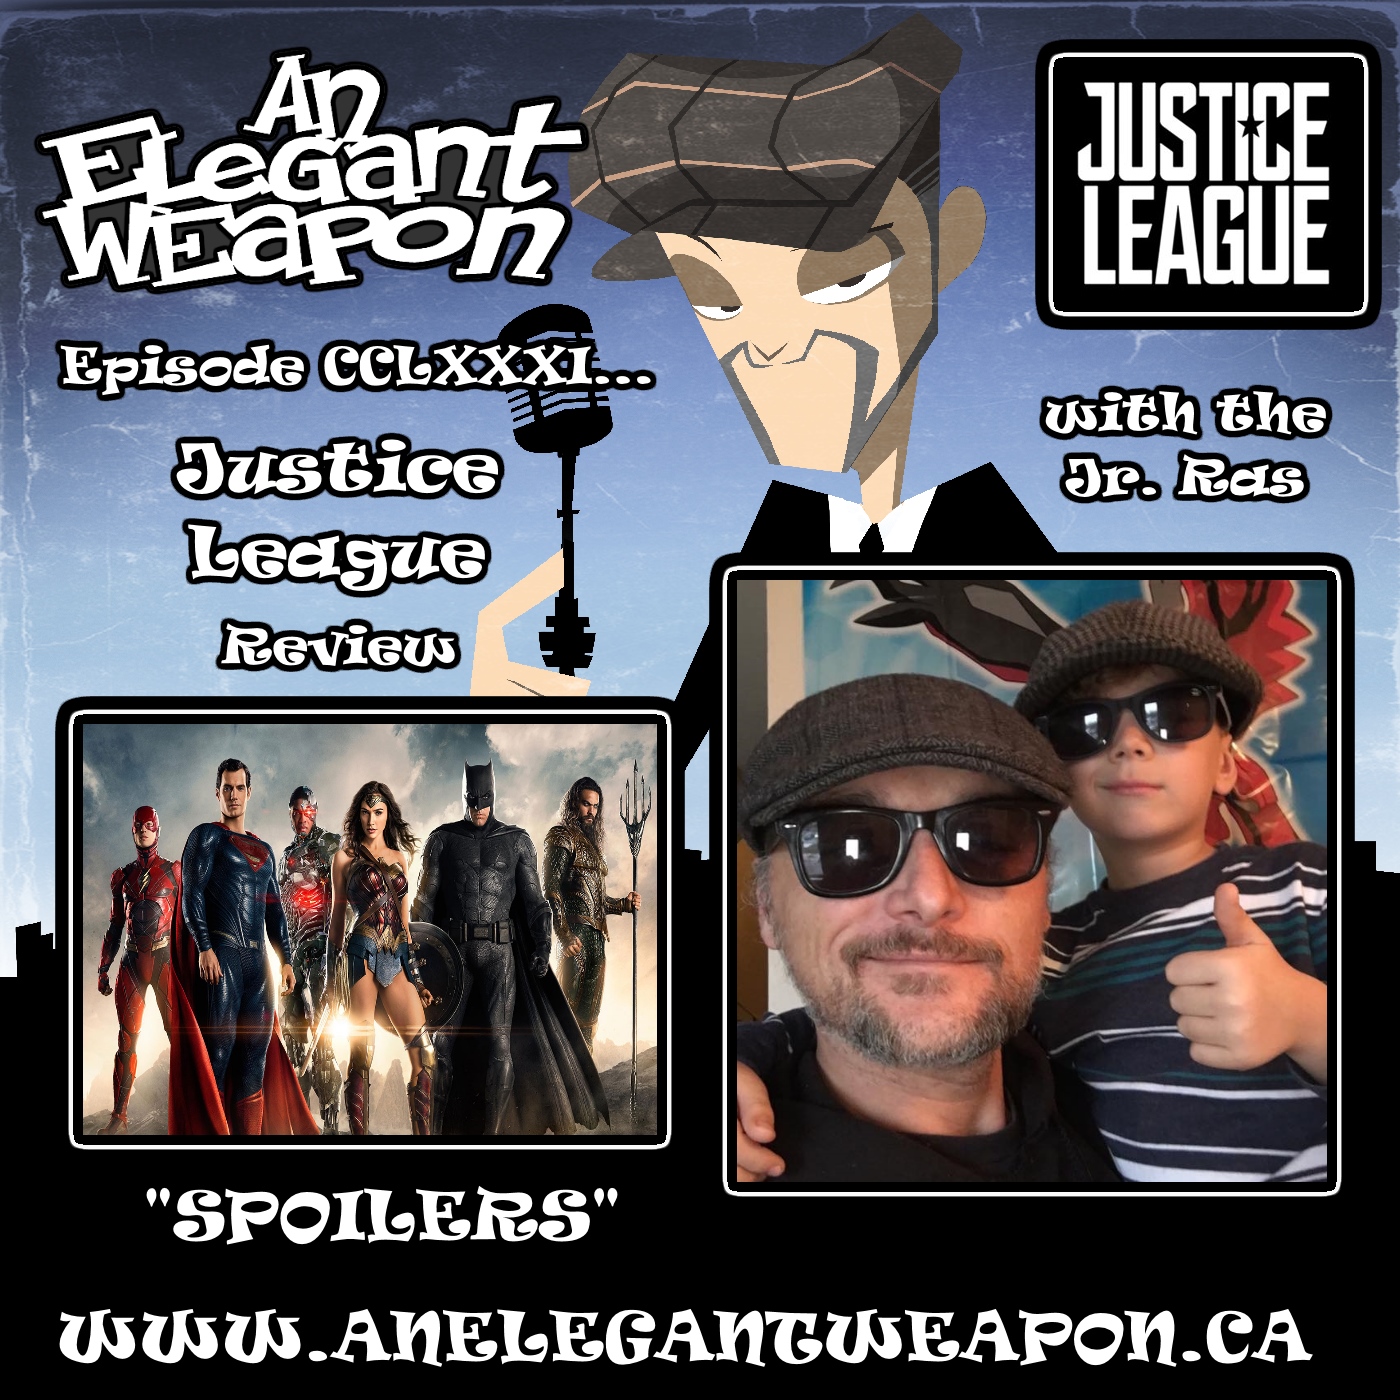 Episode CCLXXXI...30 in 30 Session 20 - Justice League Review w/ The Jr. Ras